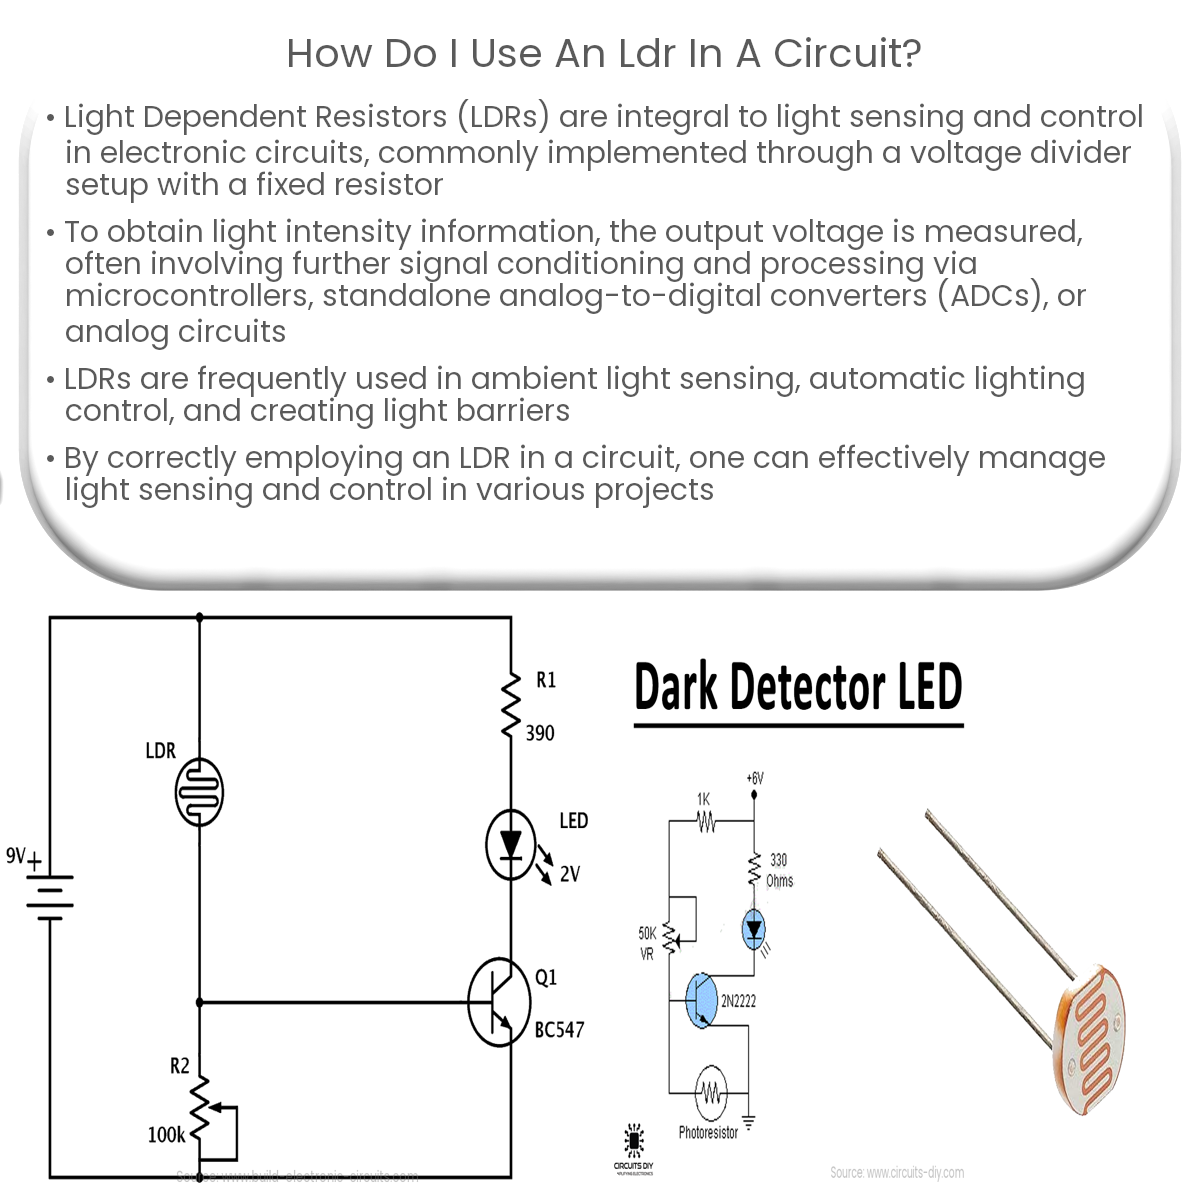 How do I use an LDR in a circuit?